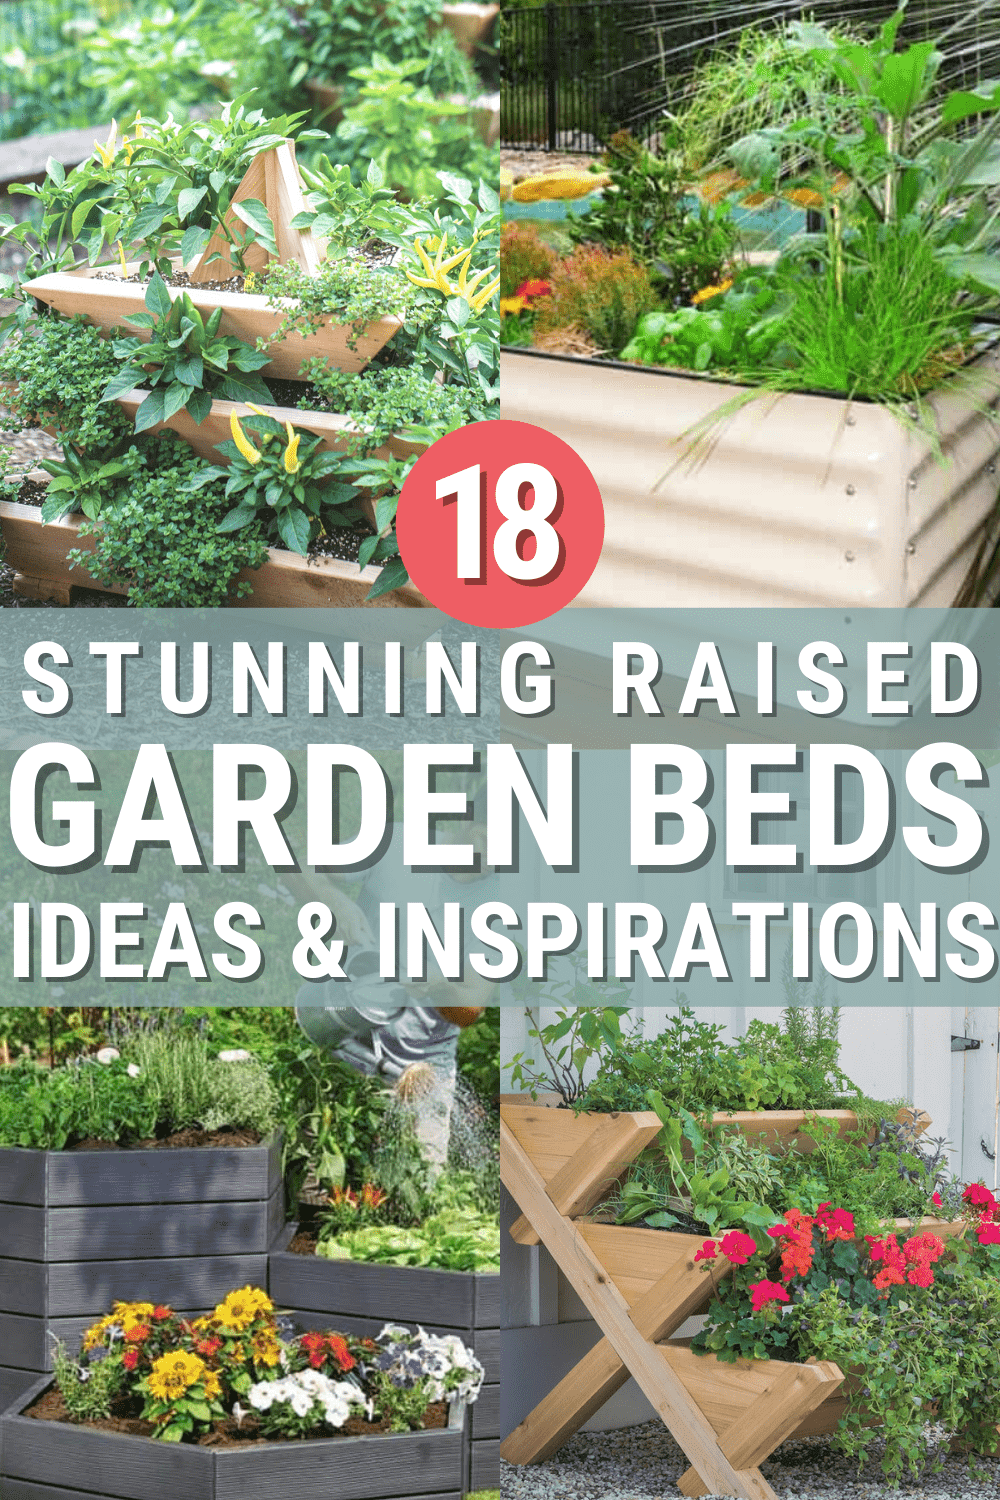 Whether you're just starting or ready to expand, here are some great raised garden bed ideas and inspiration! via @mystayathome